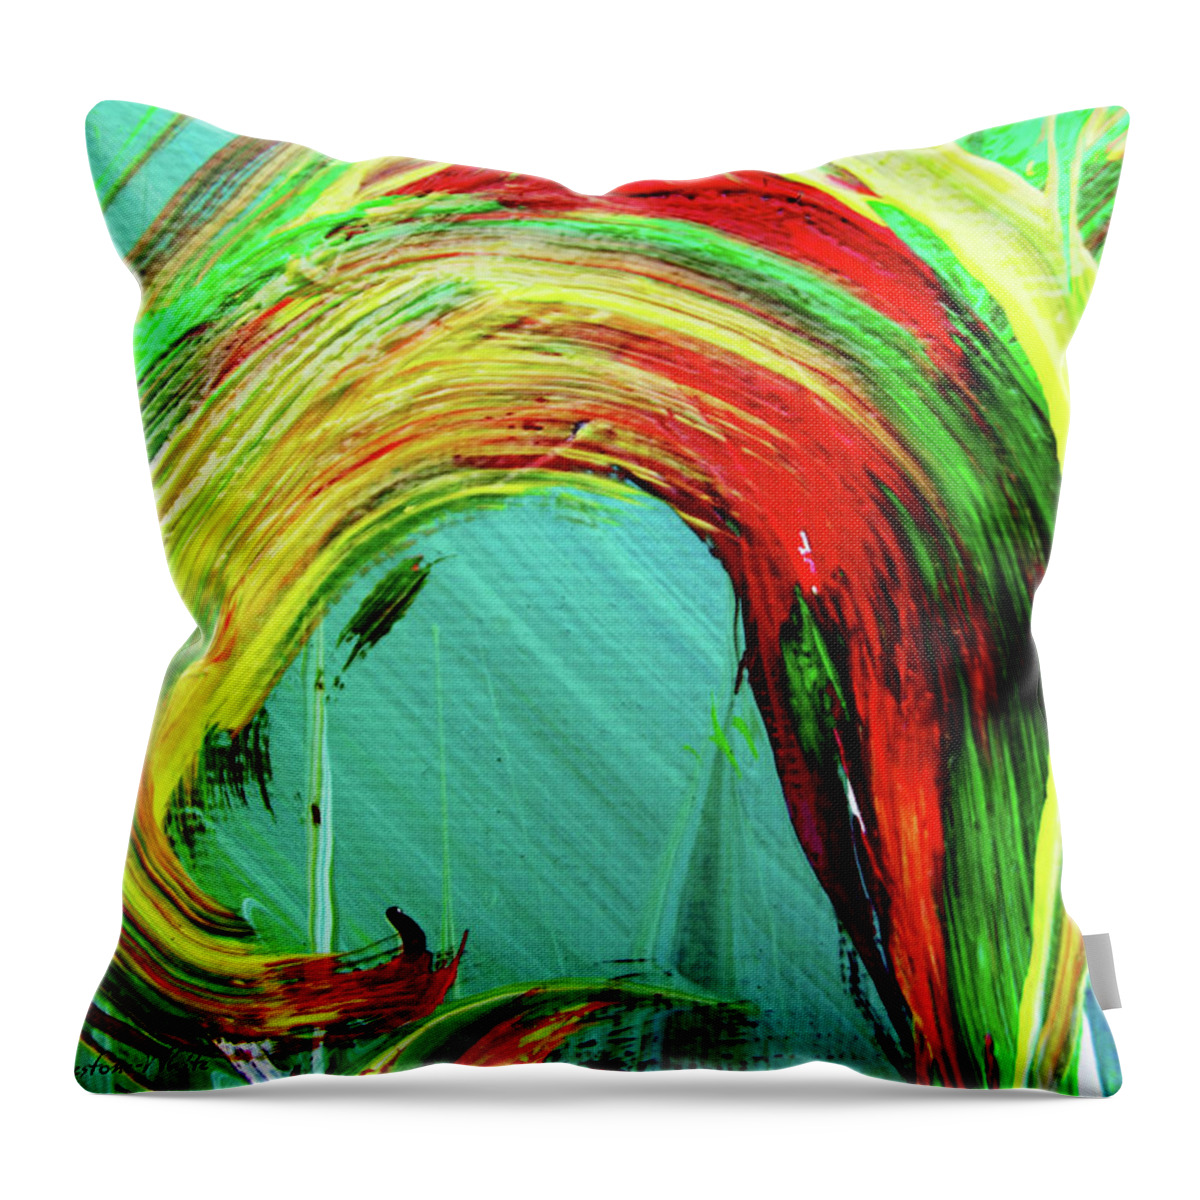 Flower Throw Pillow featuring the painting Wildflower In The Meadow by Melinda Firestone-White